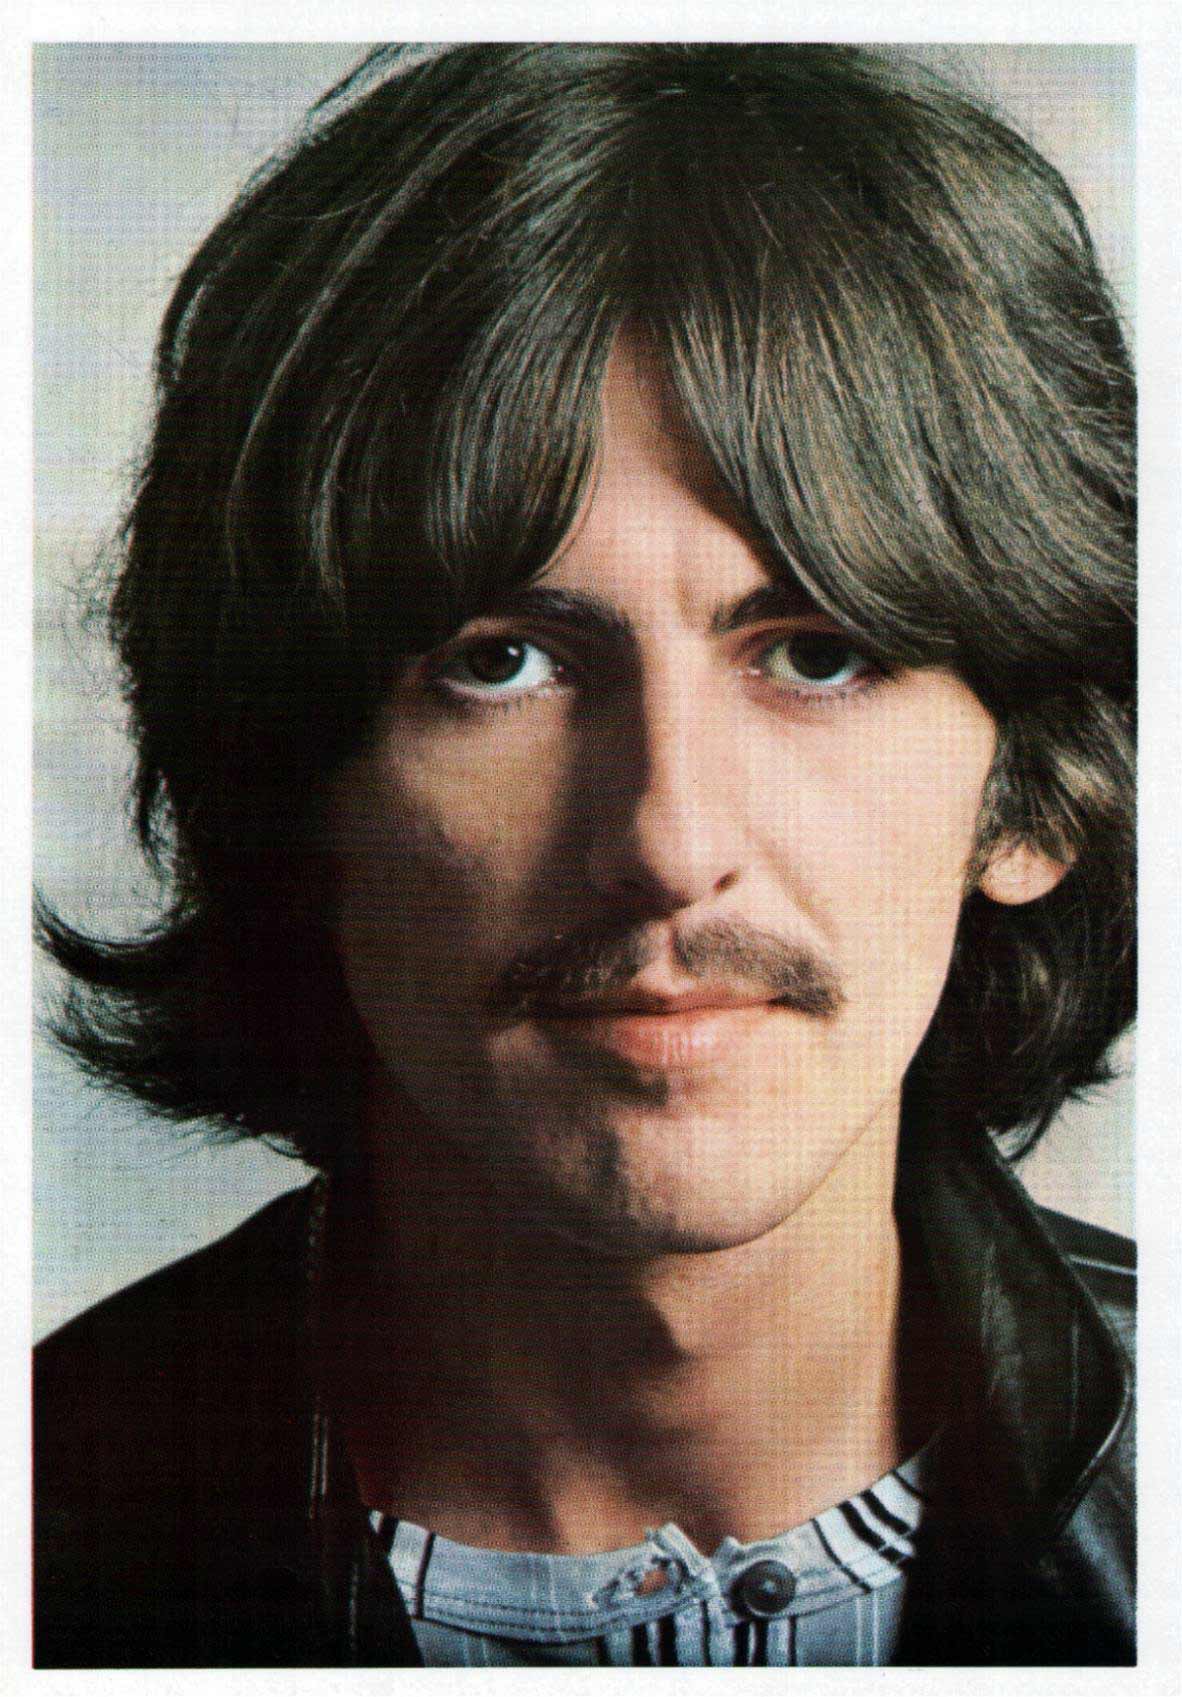 George Harrison at the time of The Beatles' White Album (image courtesy The Beatles Bible)